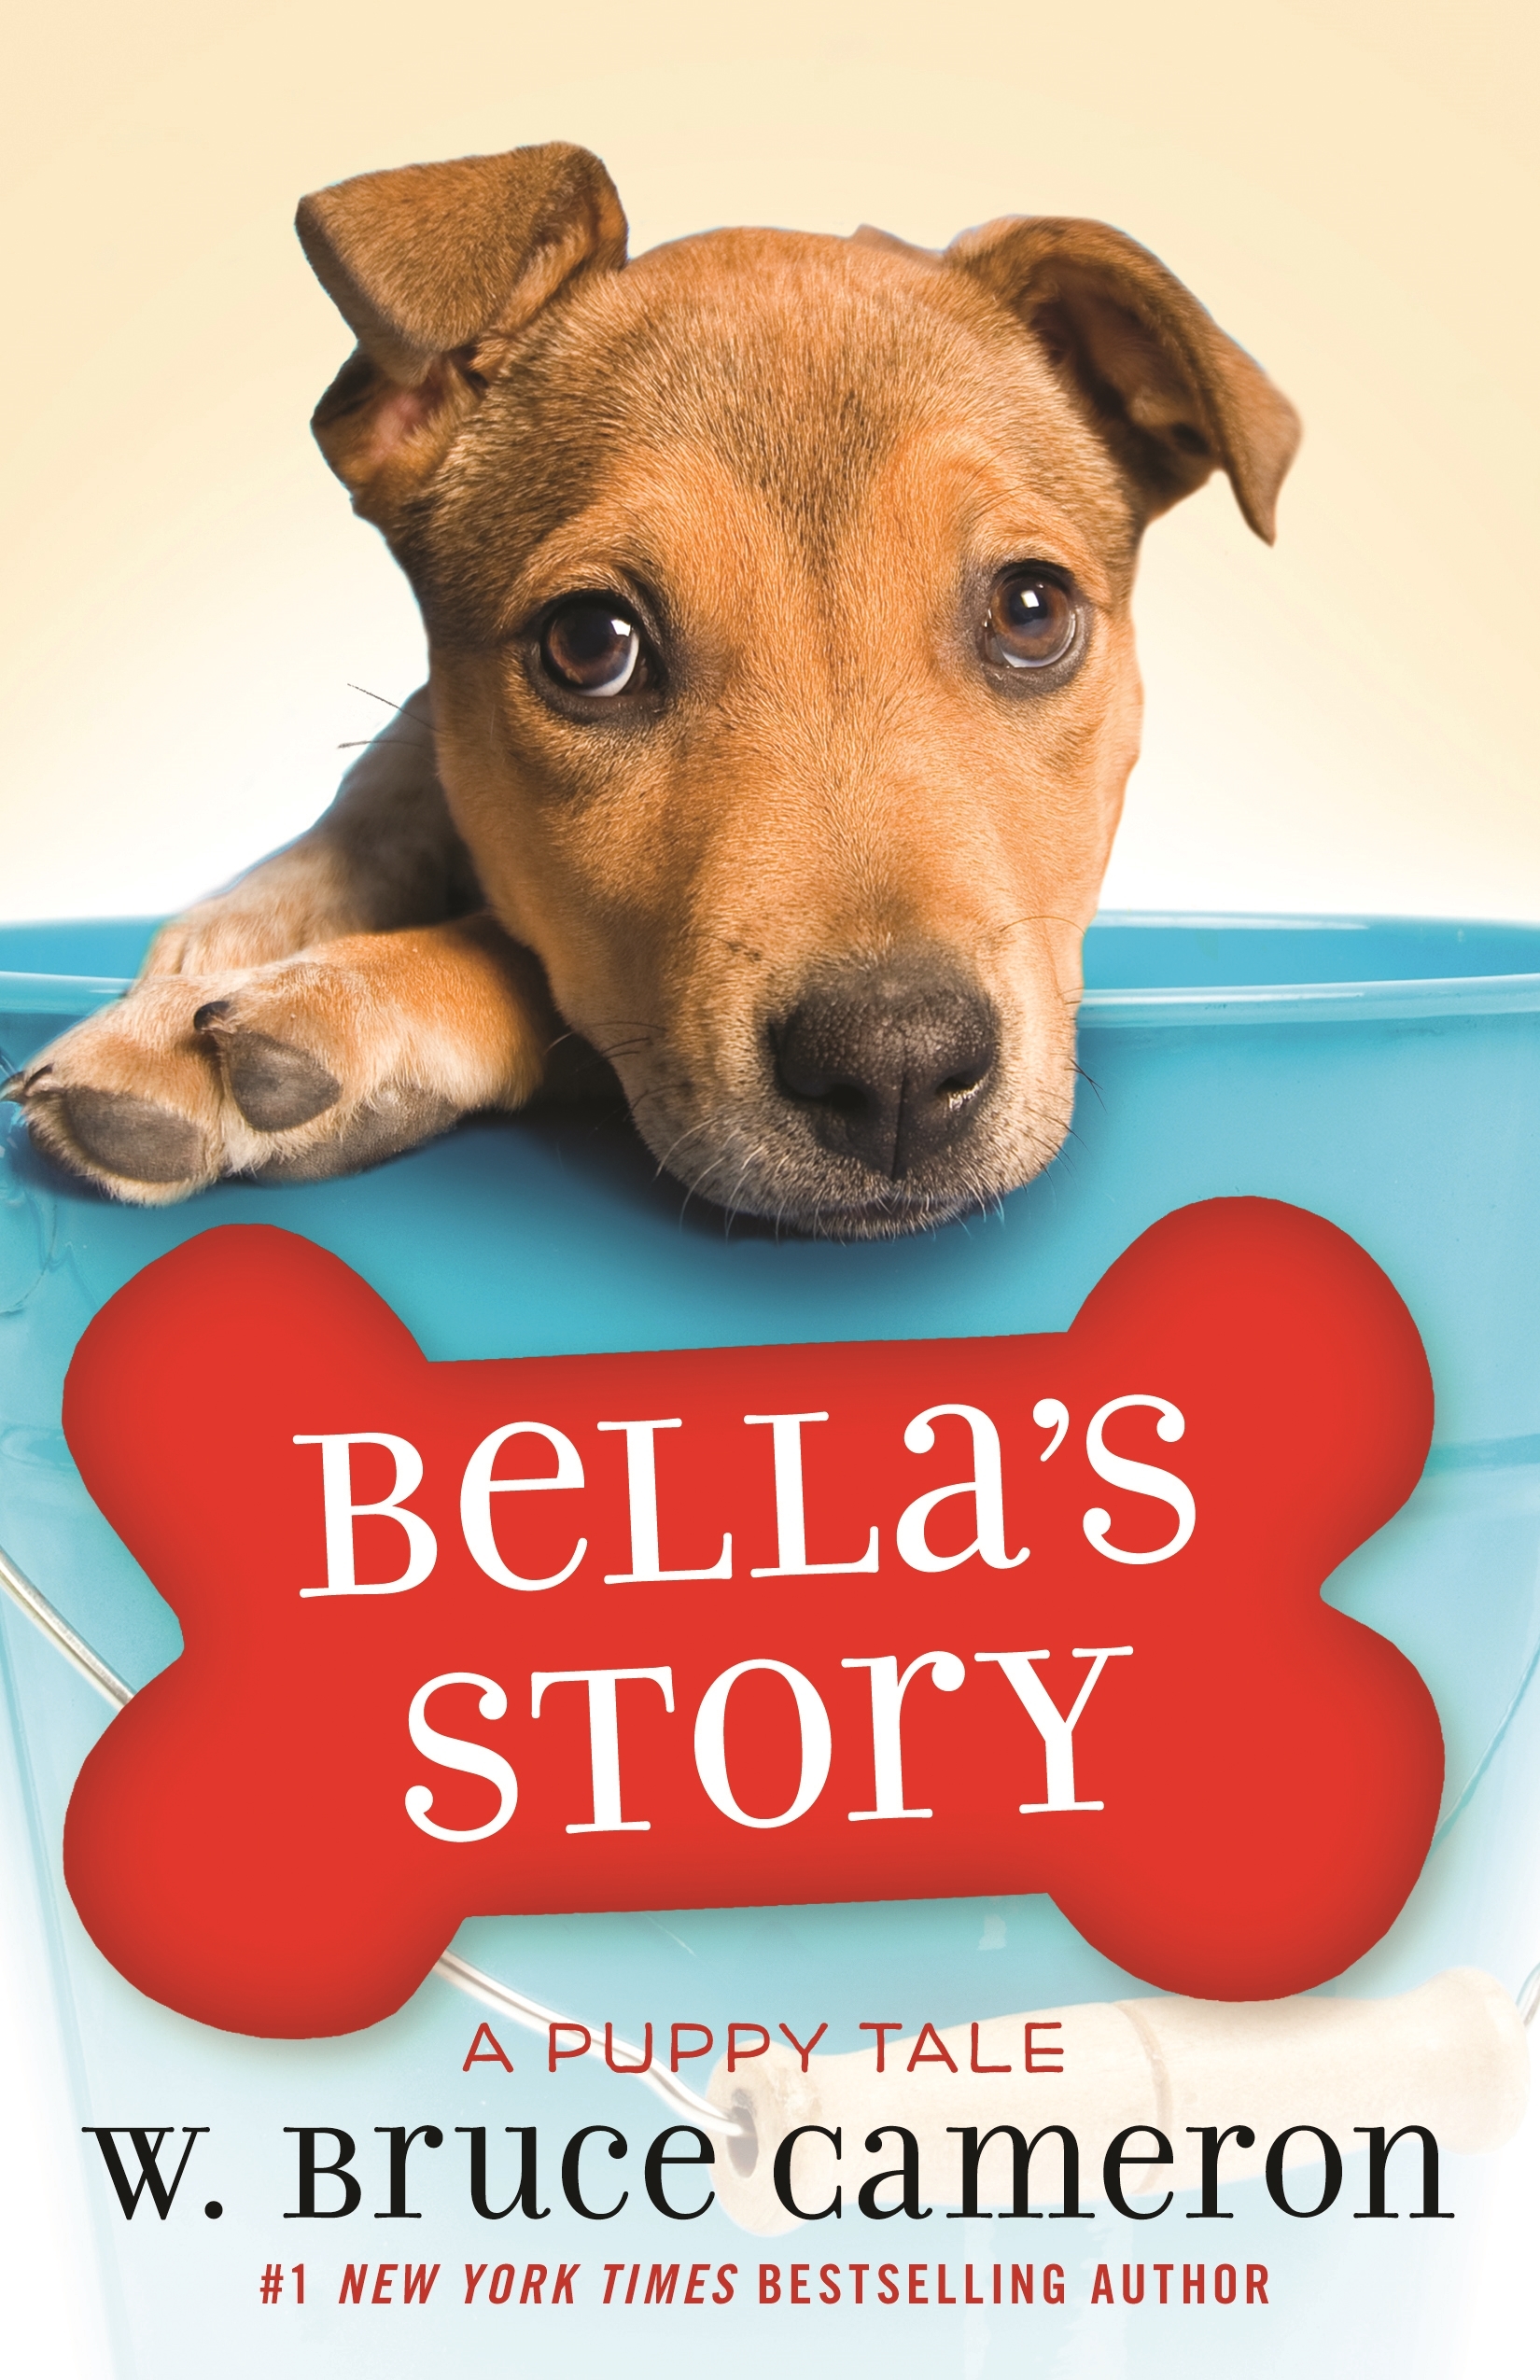 Bella's Story : A Puppy Tale by W. Bruce Cameron